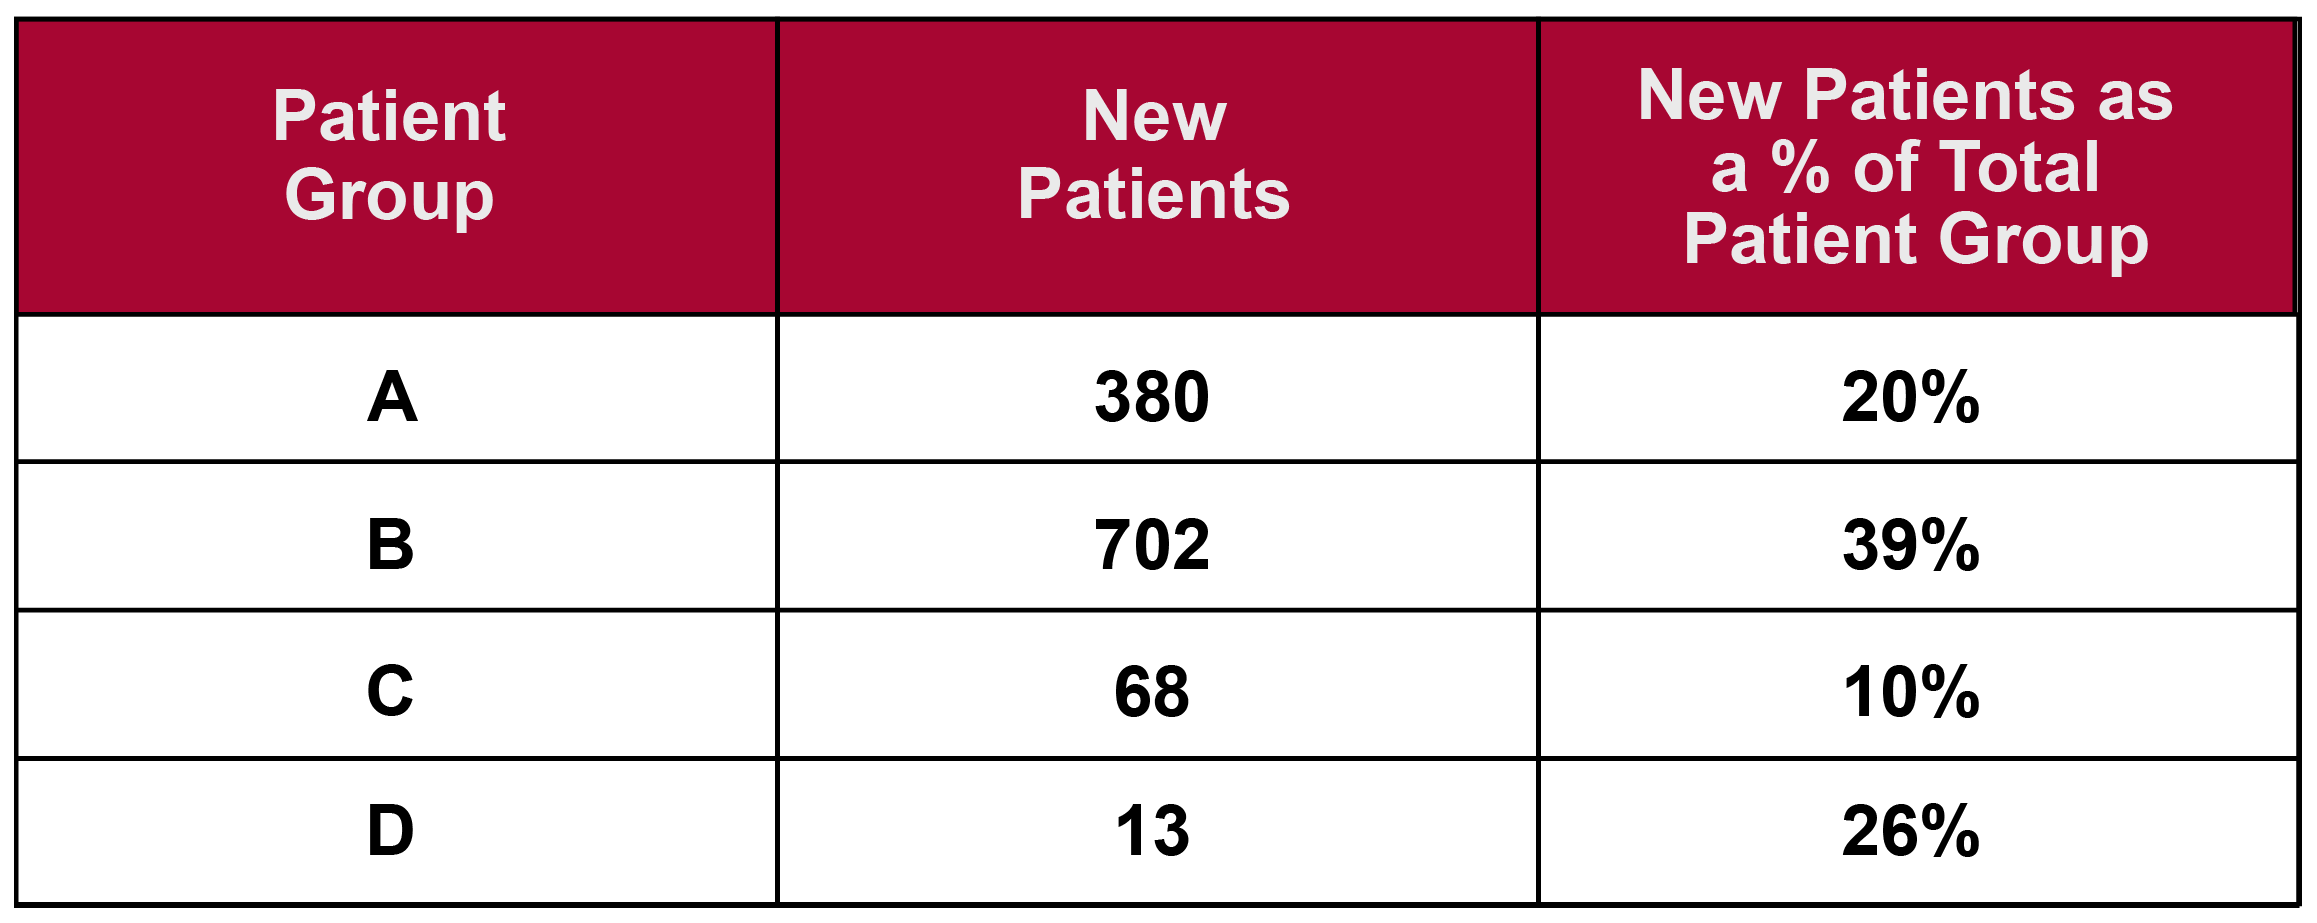 New Patient Data table